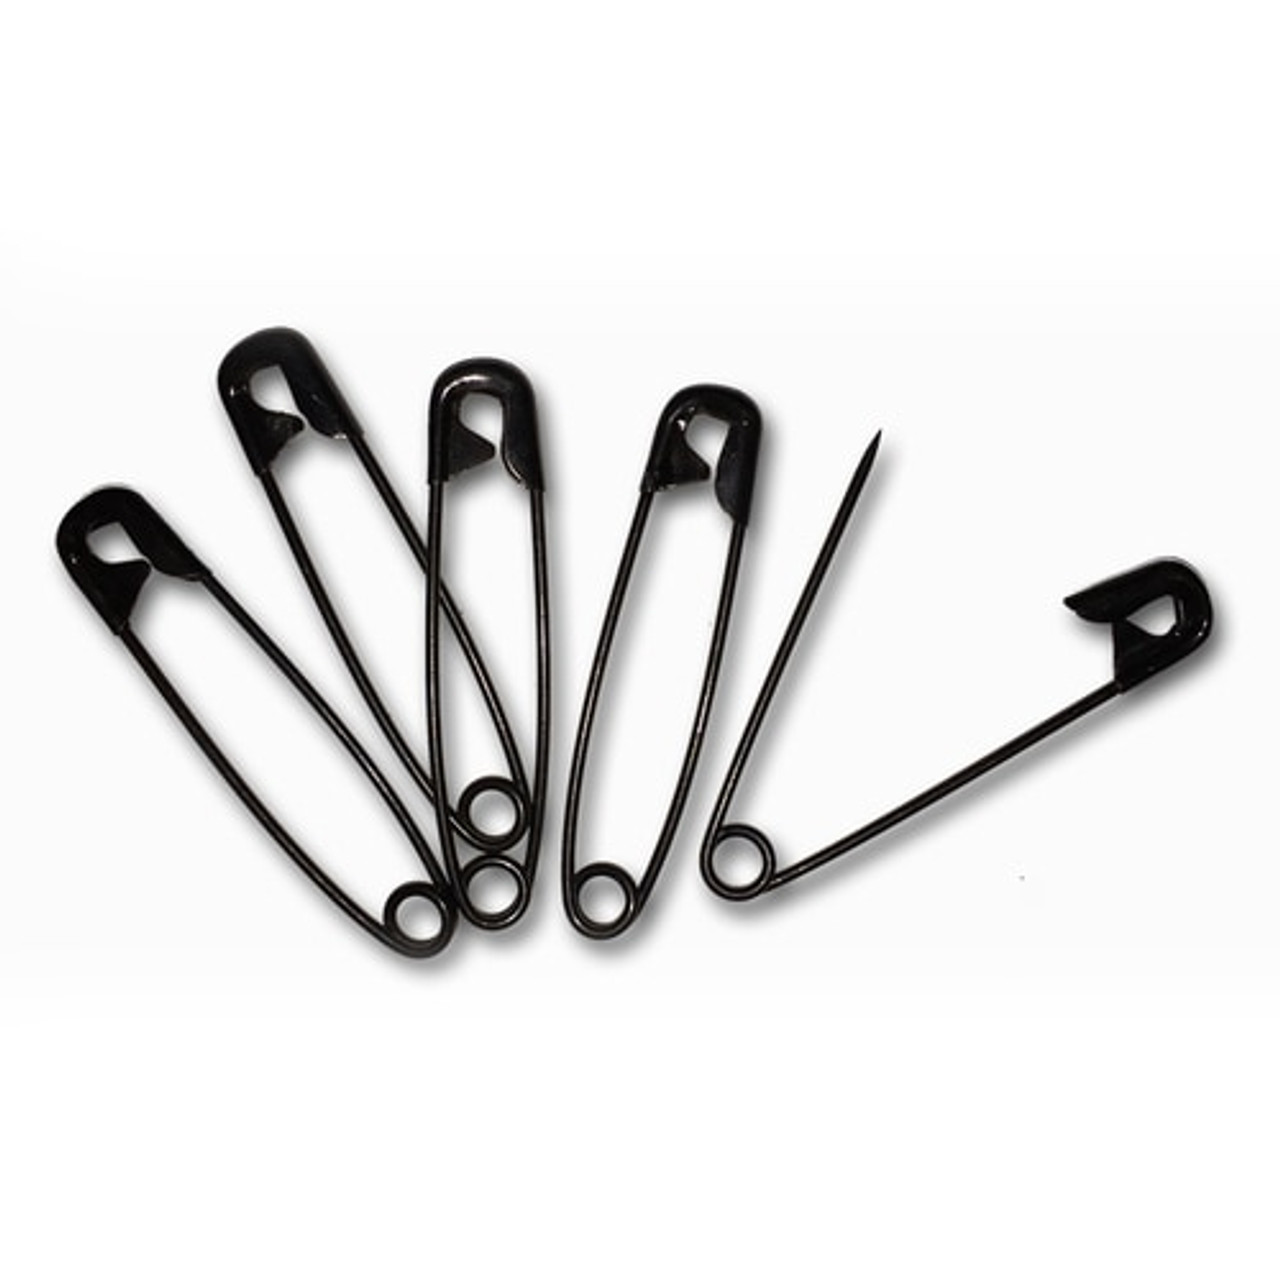 BLACK SAFETY PINS for Crafts 3/4 Inch Number 00 Safety Pins Black